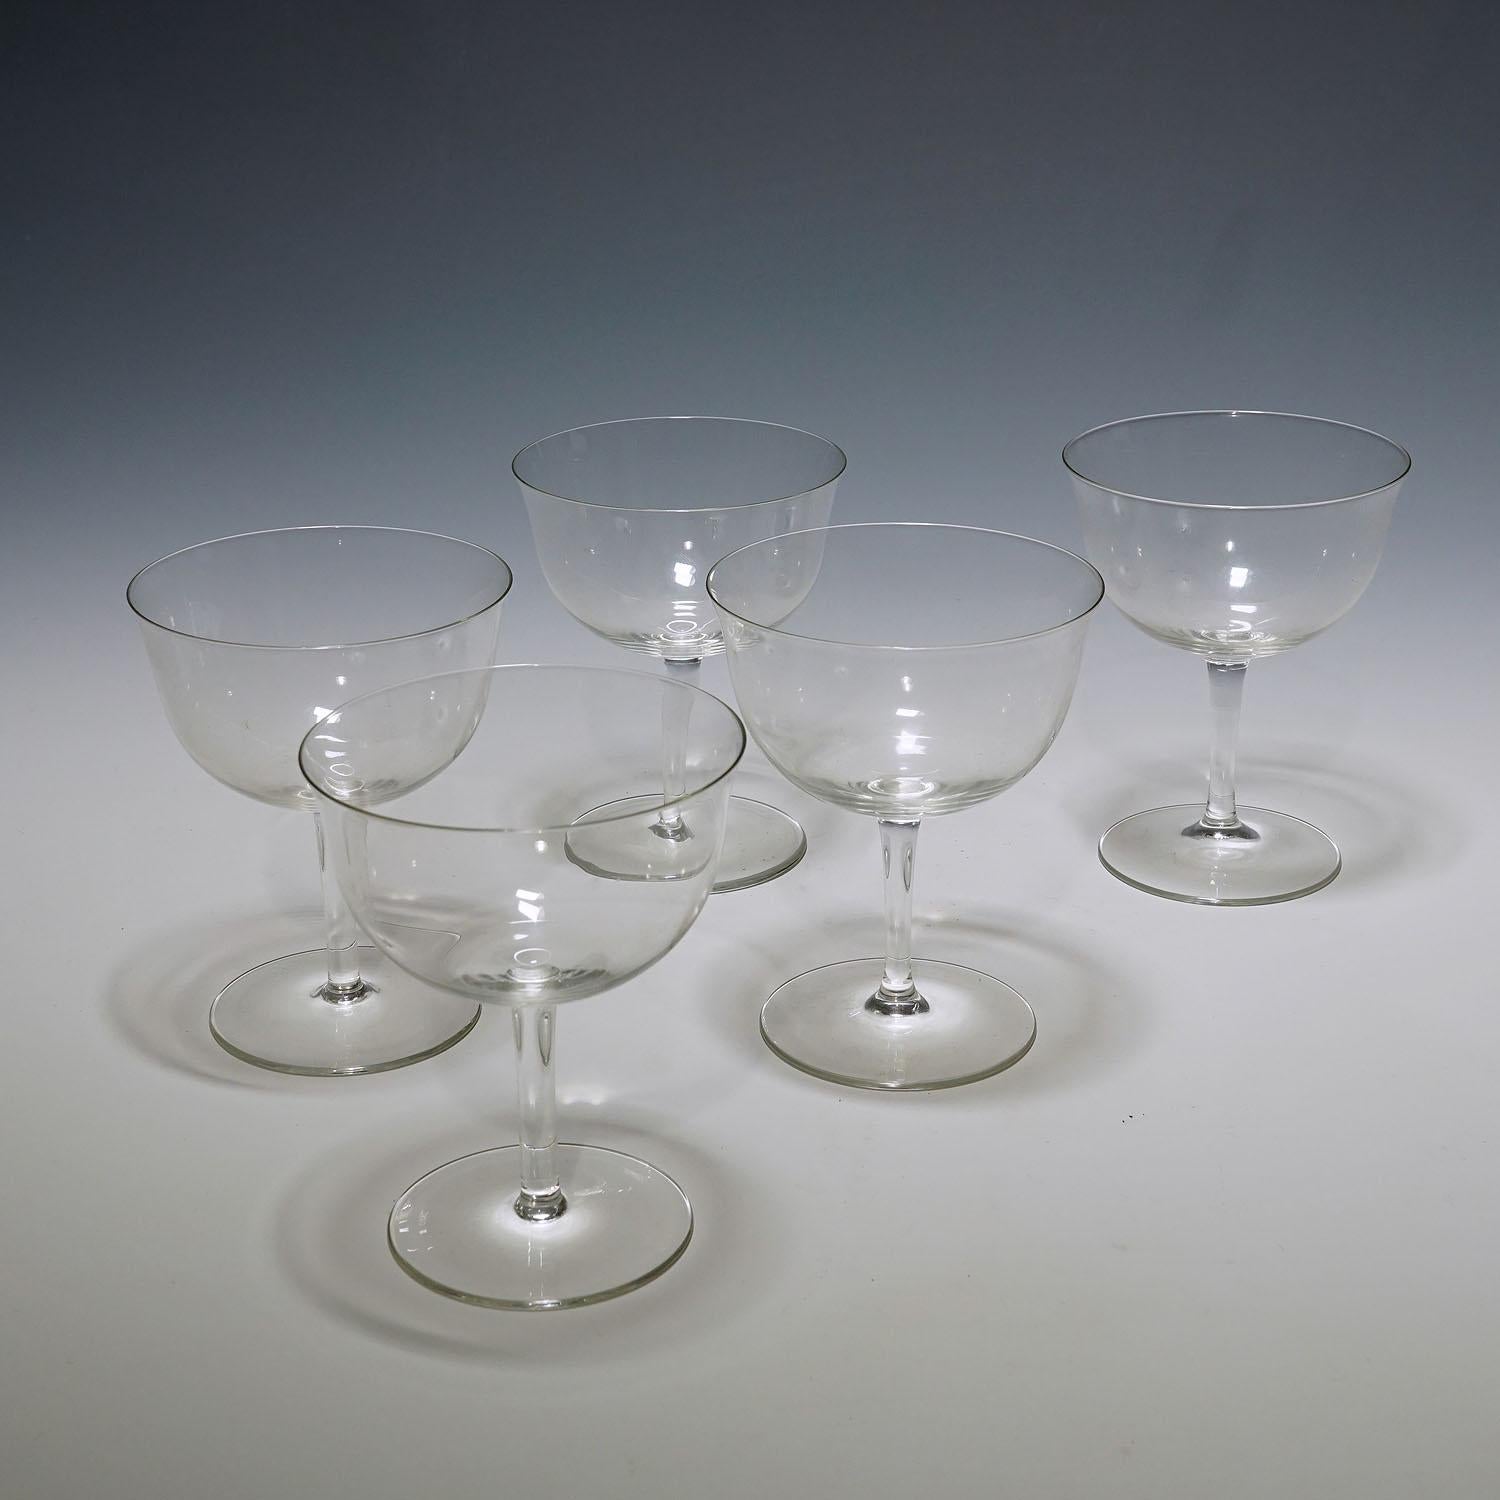 Set of Five Wine Glasses by Josef Hoffmann for Lobmeyr, 1917

A set of five filigree wine glasses. Attributed to Josef Hofmann, Vienna who designed the service 